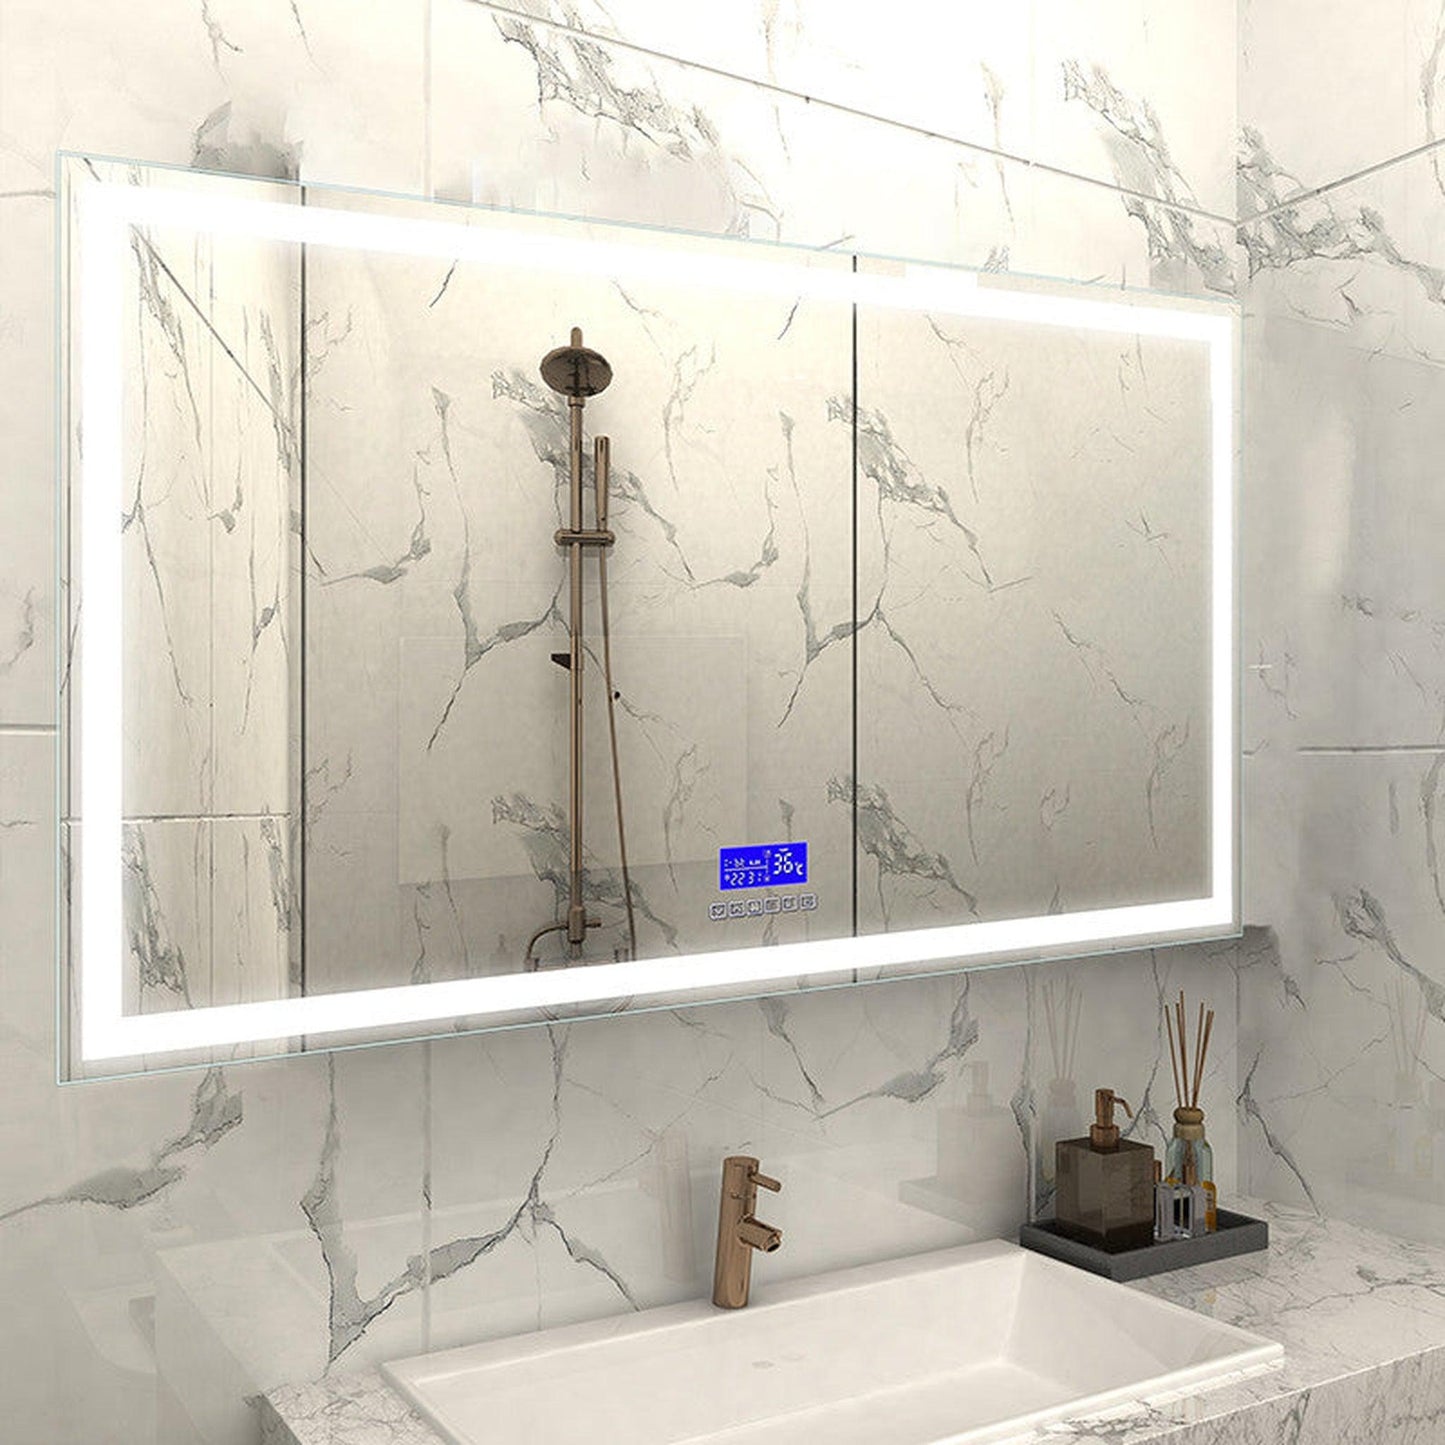 Moreno Florence 68" x 36" Frameless LED Mirror With Bluetooth, Time and Temperature